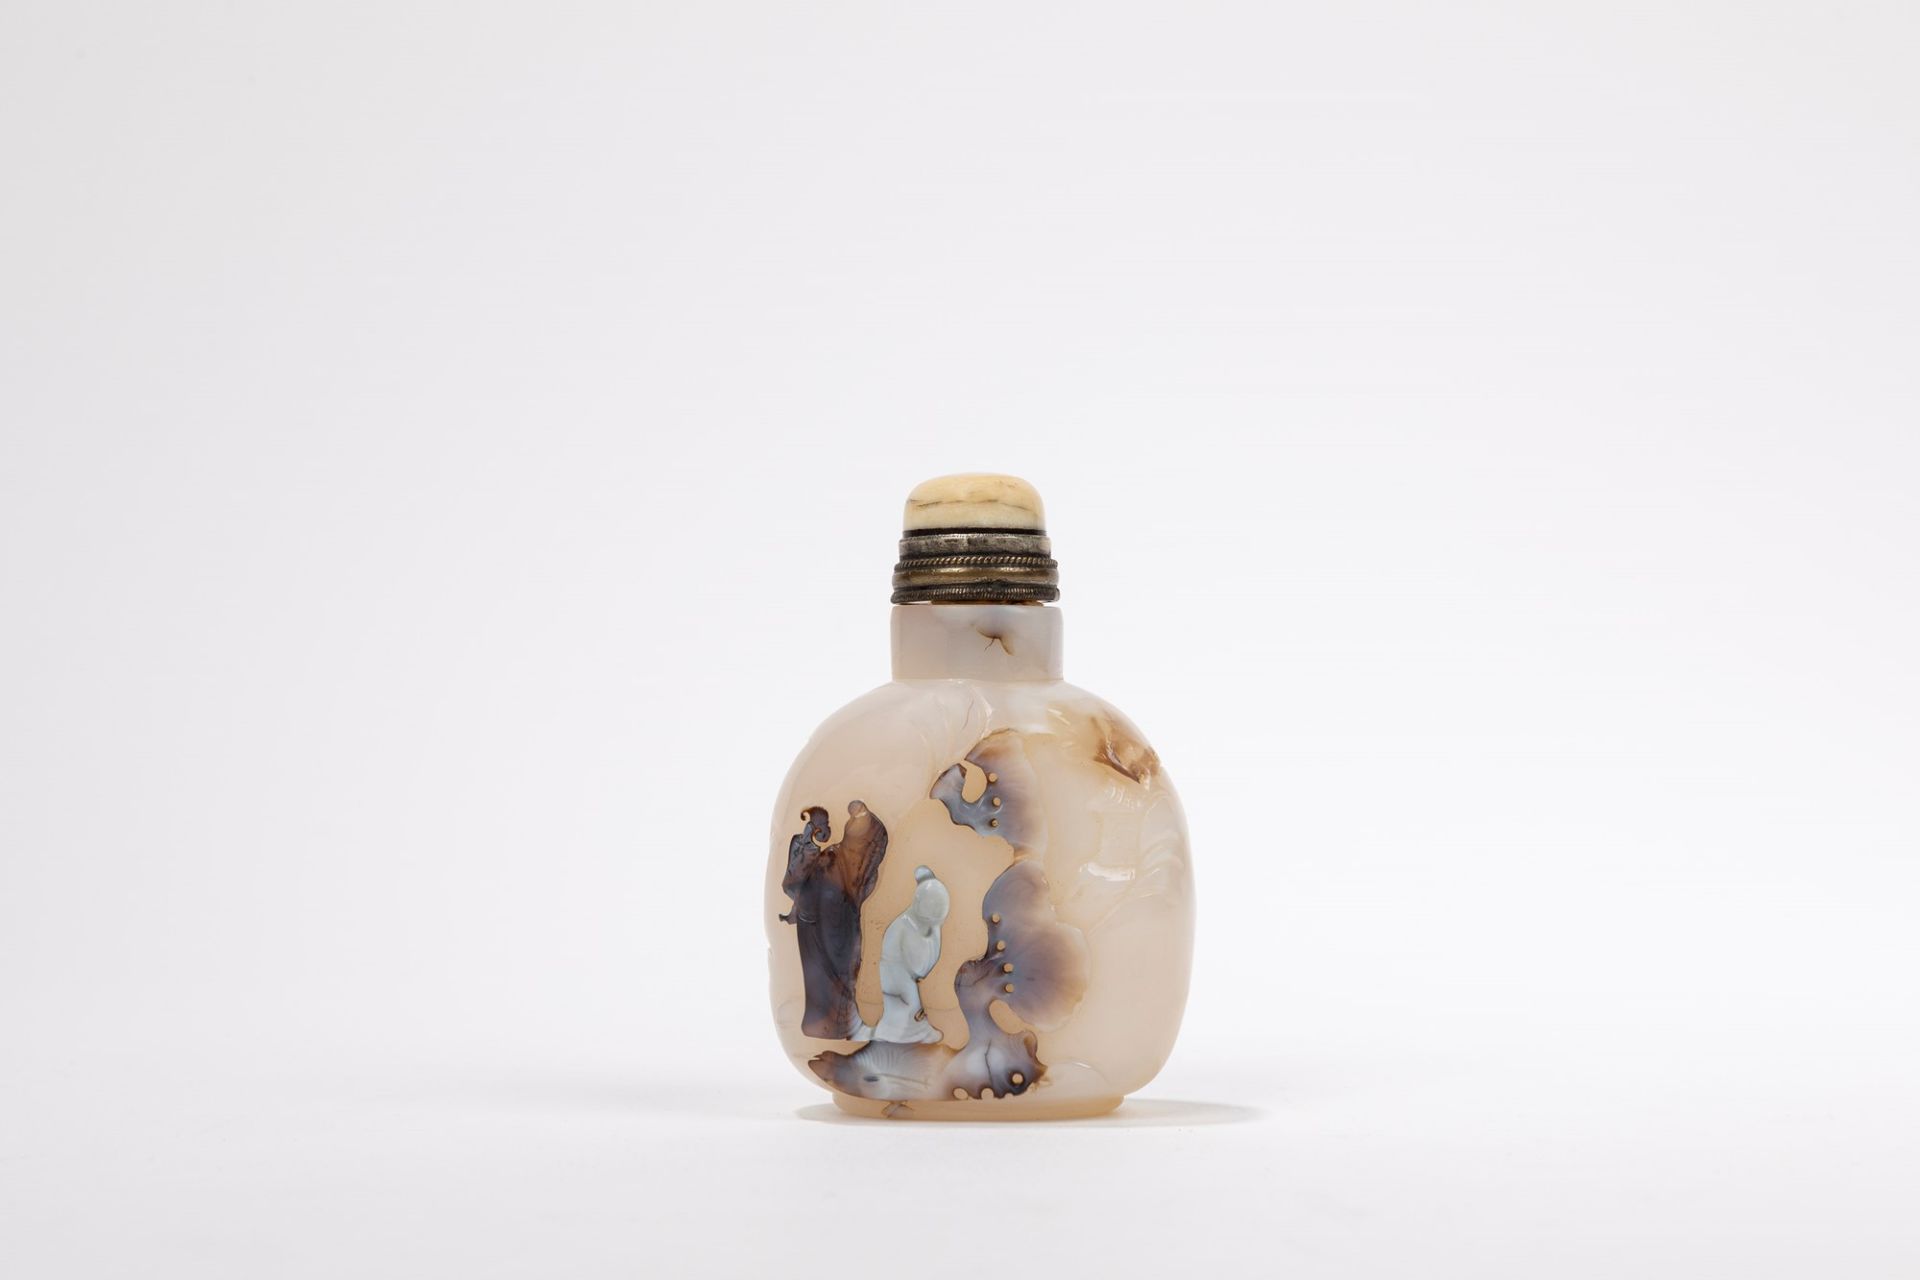 A ROCK CRYSTAL SNUFF BOTTLE, China, Qing dynasty, 19th century - Image 2 of 2